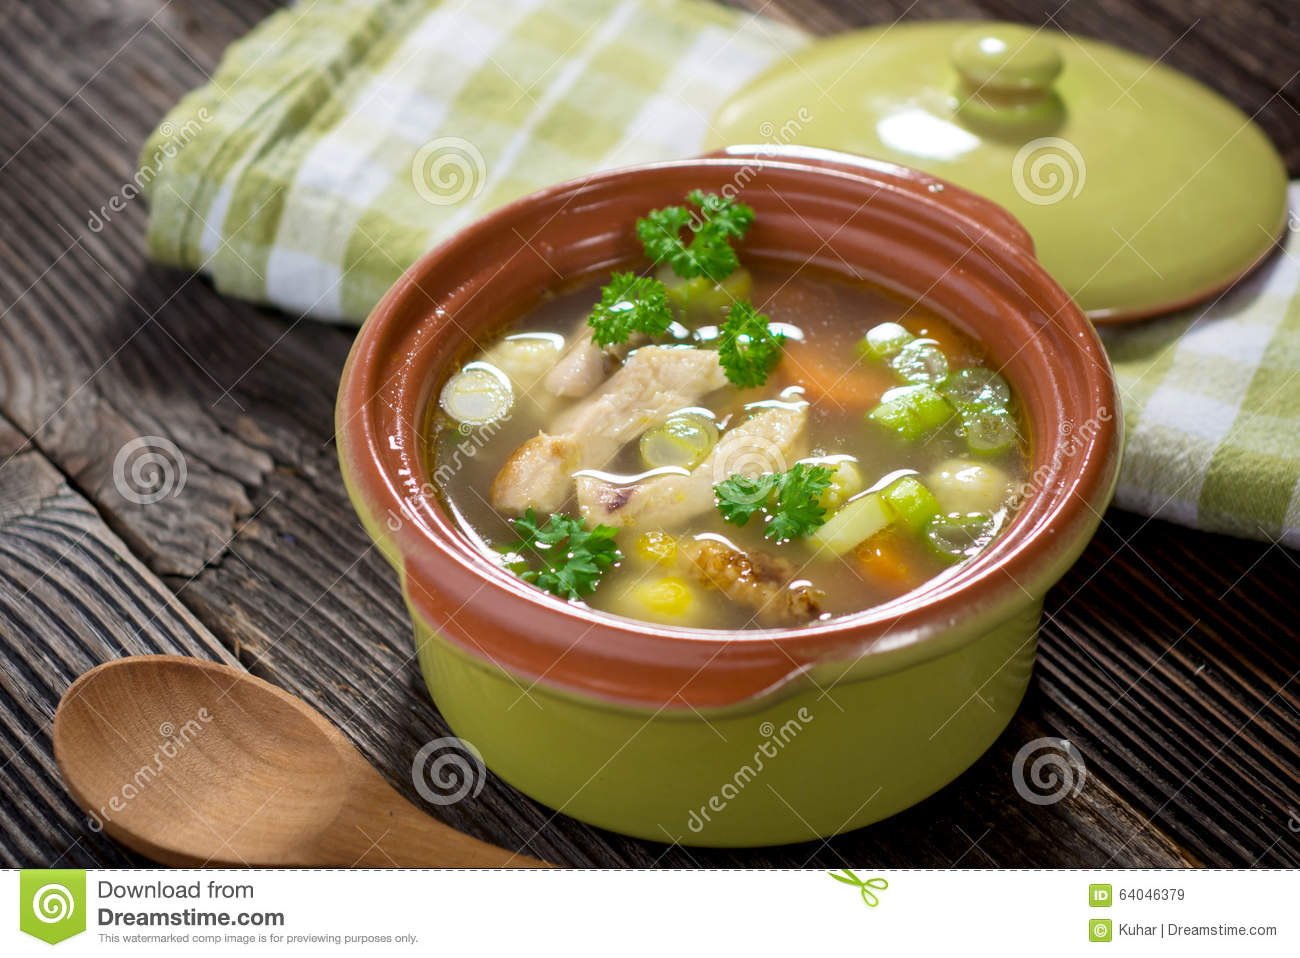 Chicken Soup Stock Photo   Image  64046379